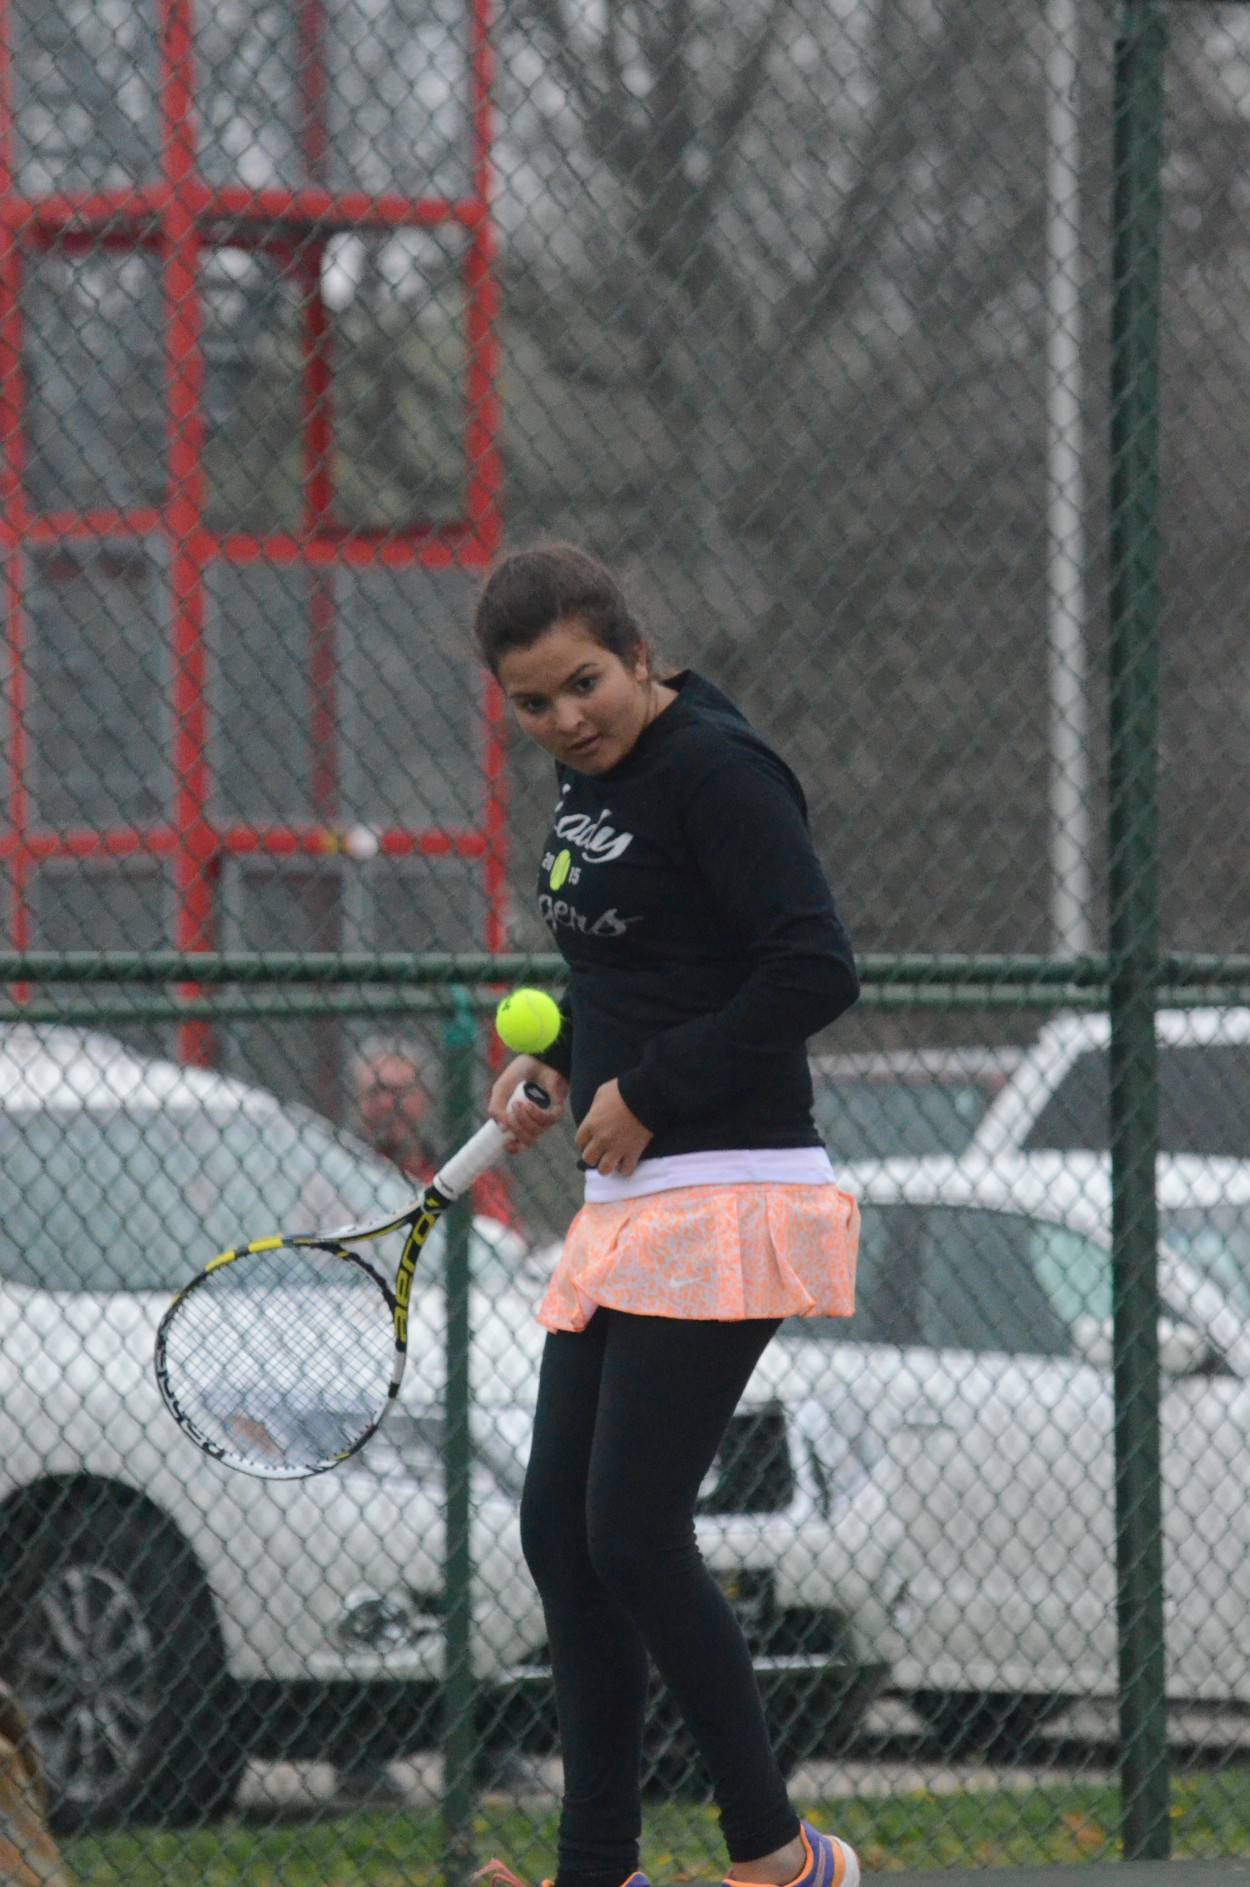 Warsaw Tennis NewLook Lineup Produces Win